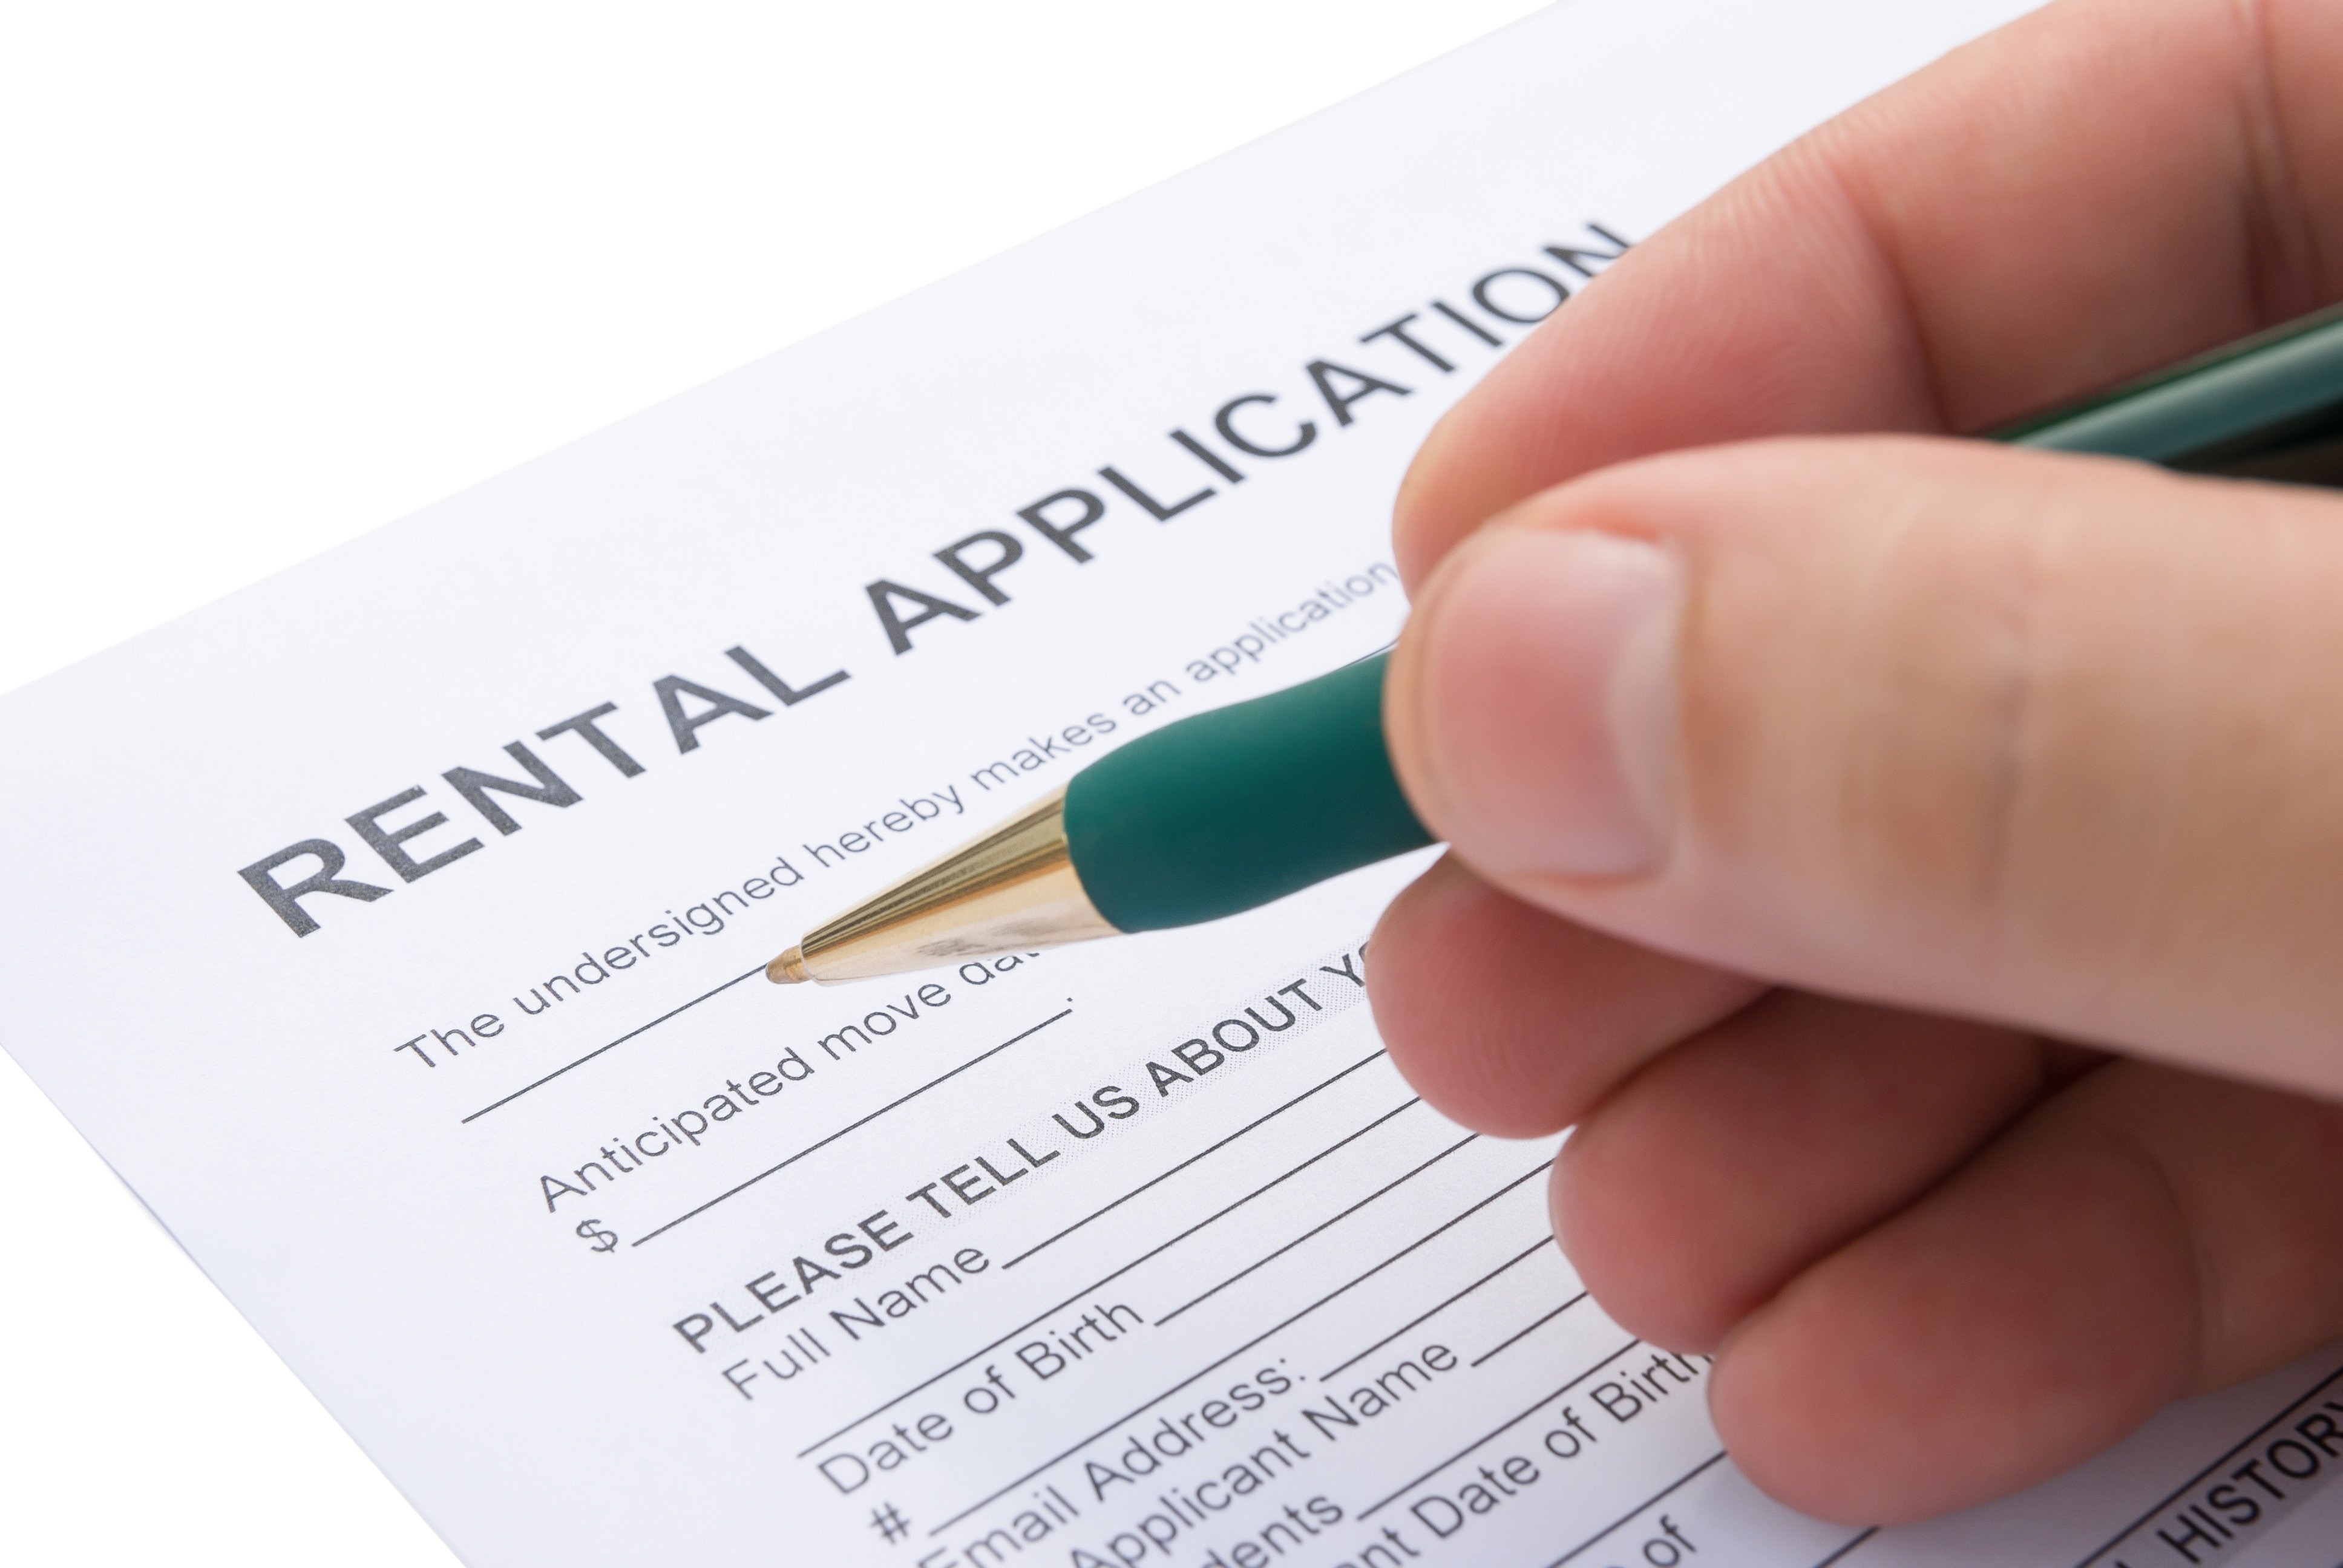 4 Things To Know When Screening a Tenant